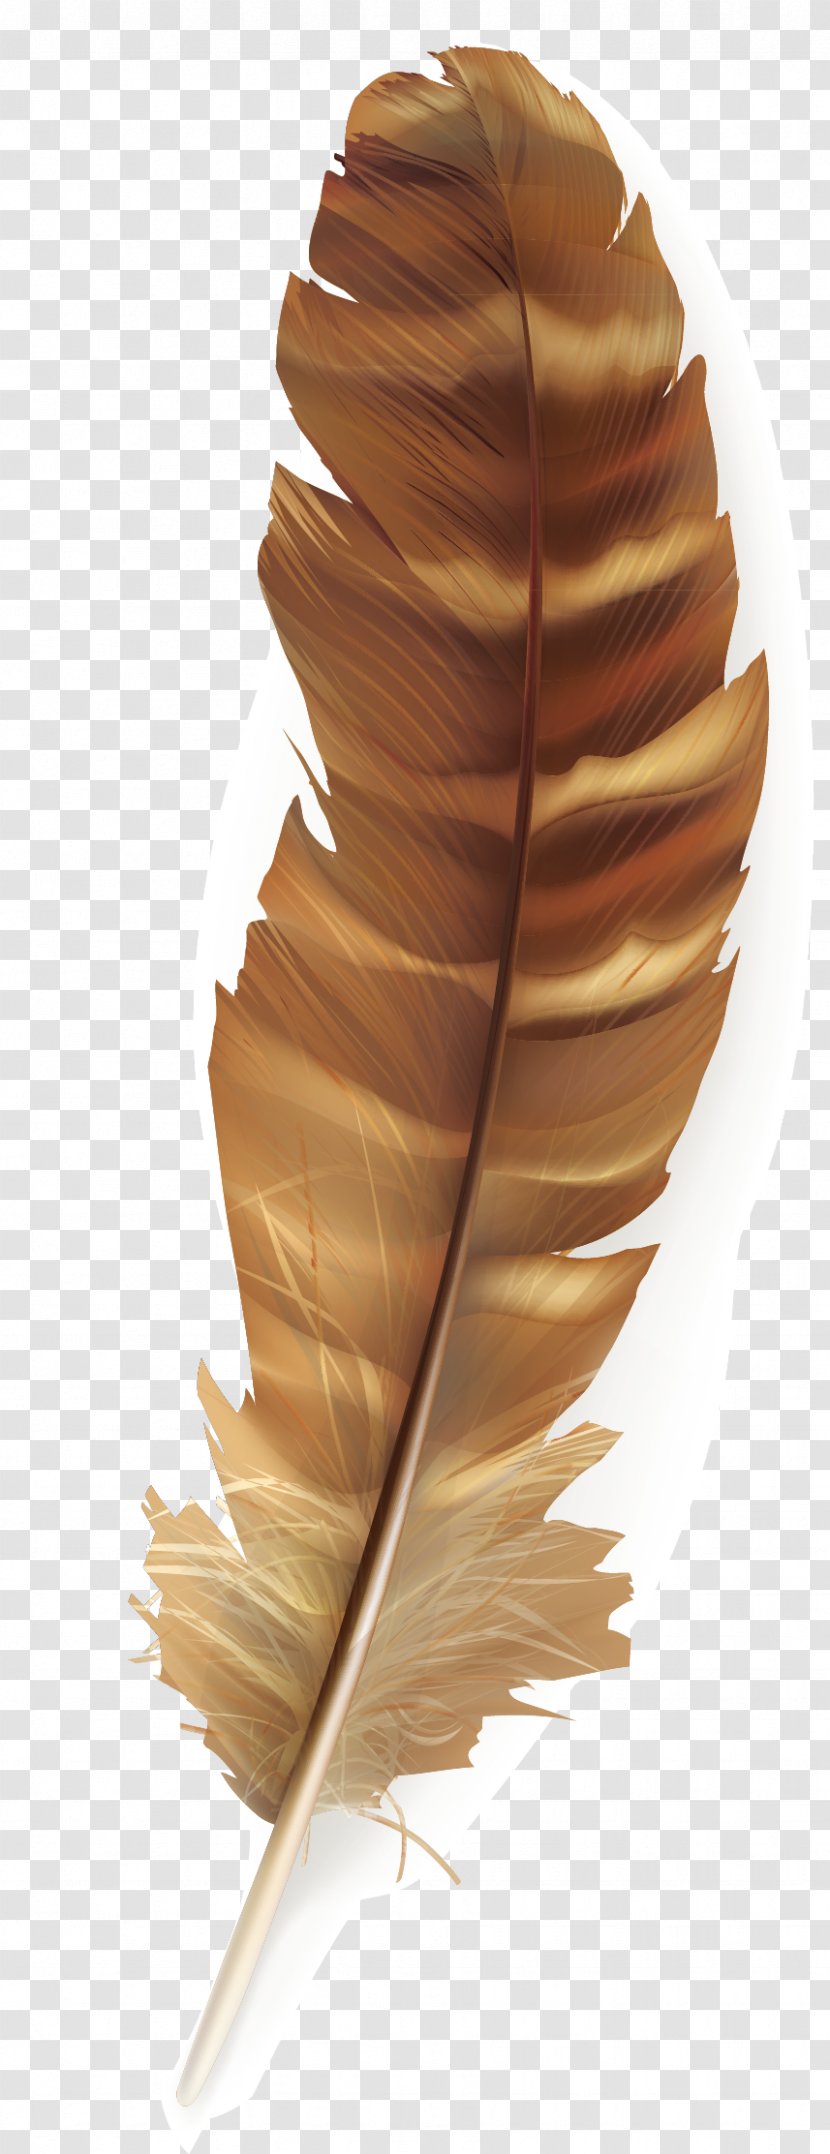 Bird Feather Poster - Plane - Brown Feathers Transparent PNG